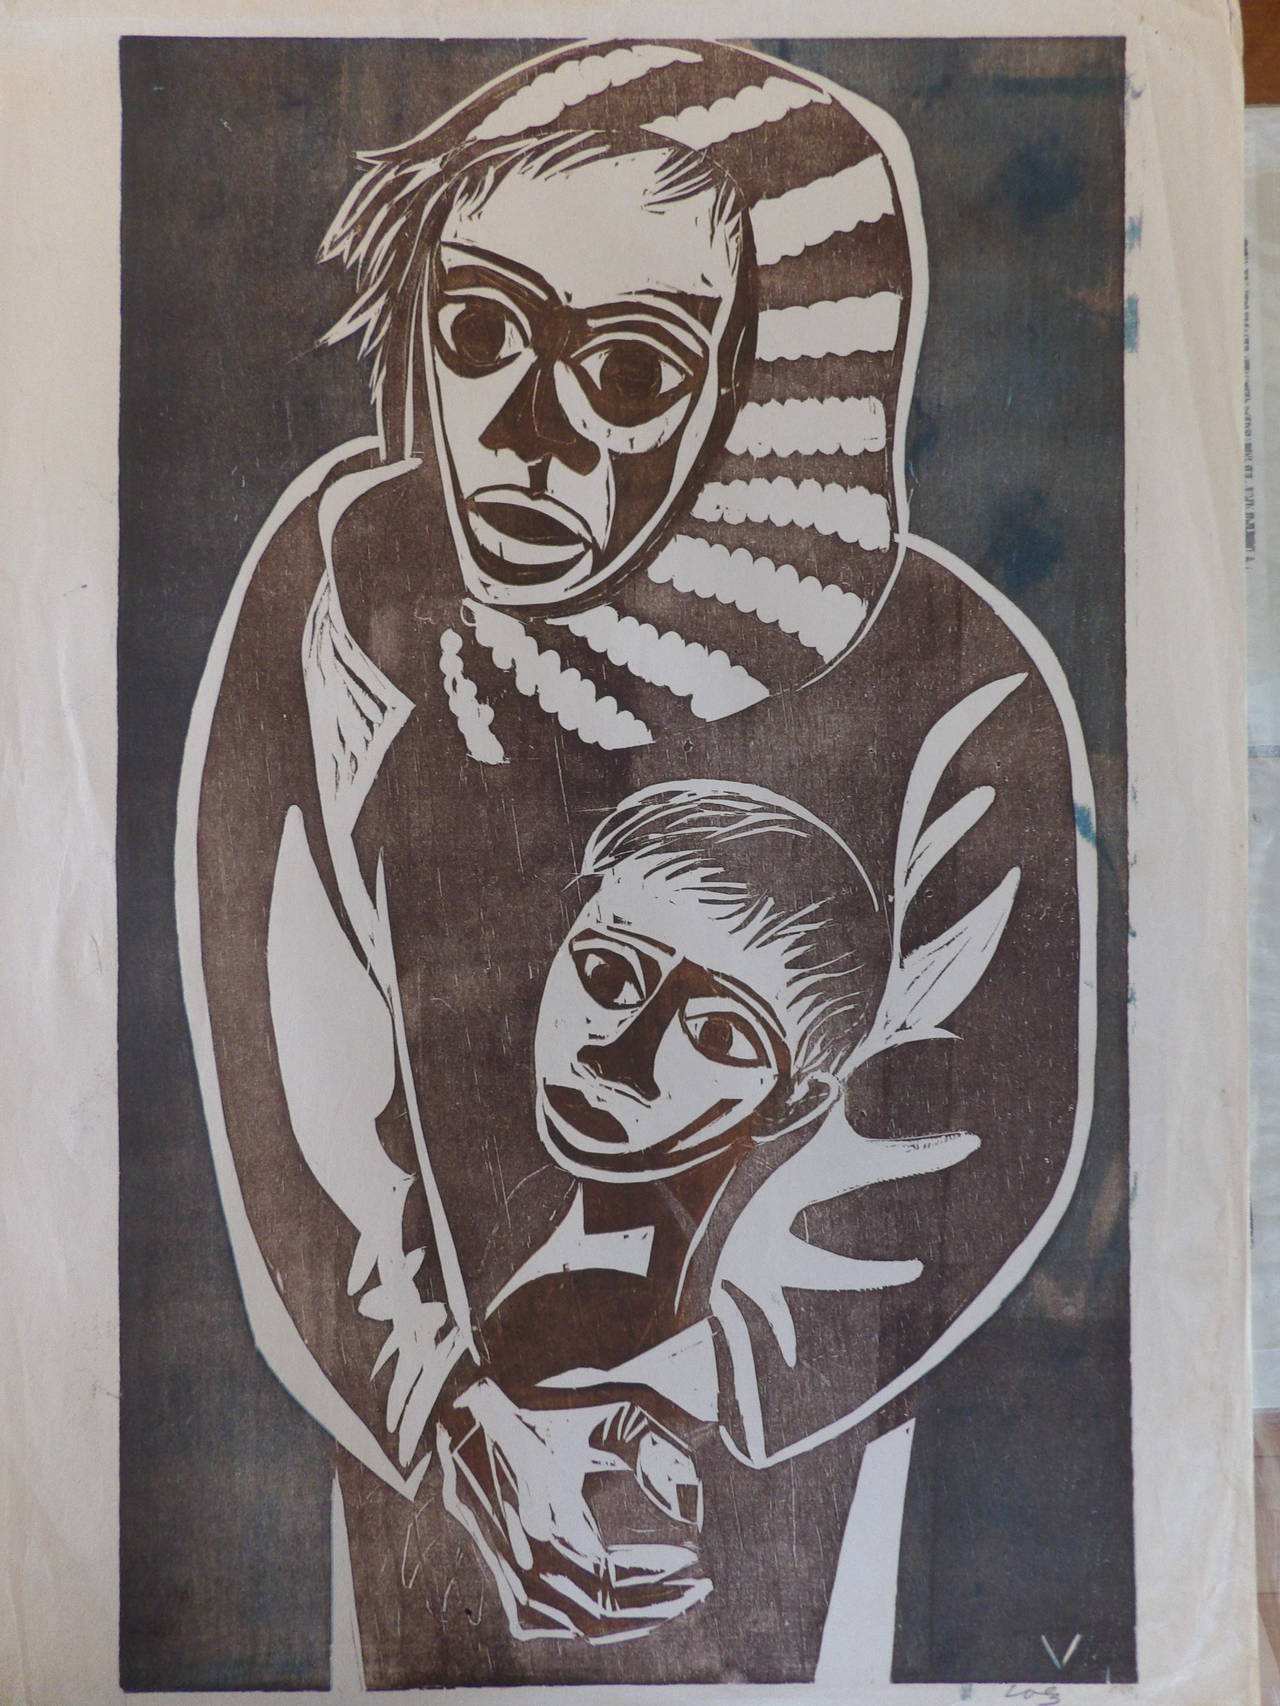 A large folio woodcut print of mother and child by Herman Roderick Volz. A painter, muralist, lithographer, set designer and ceramist. Formal training at the Art und Gewerbescule in Zurich and the Academy of Fine Arts, Vienna. Immigrated from Zurich